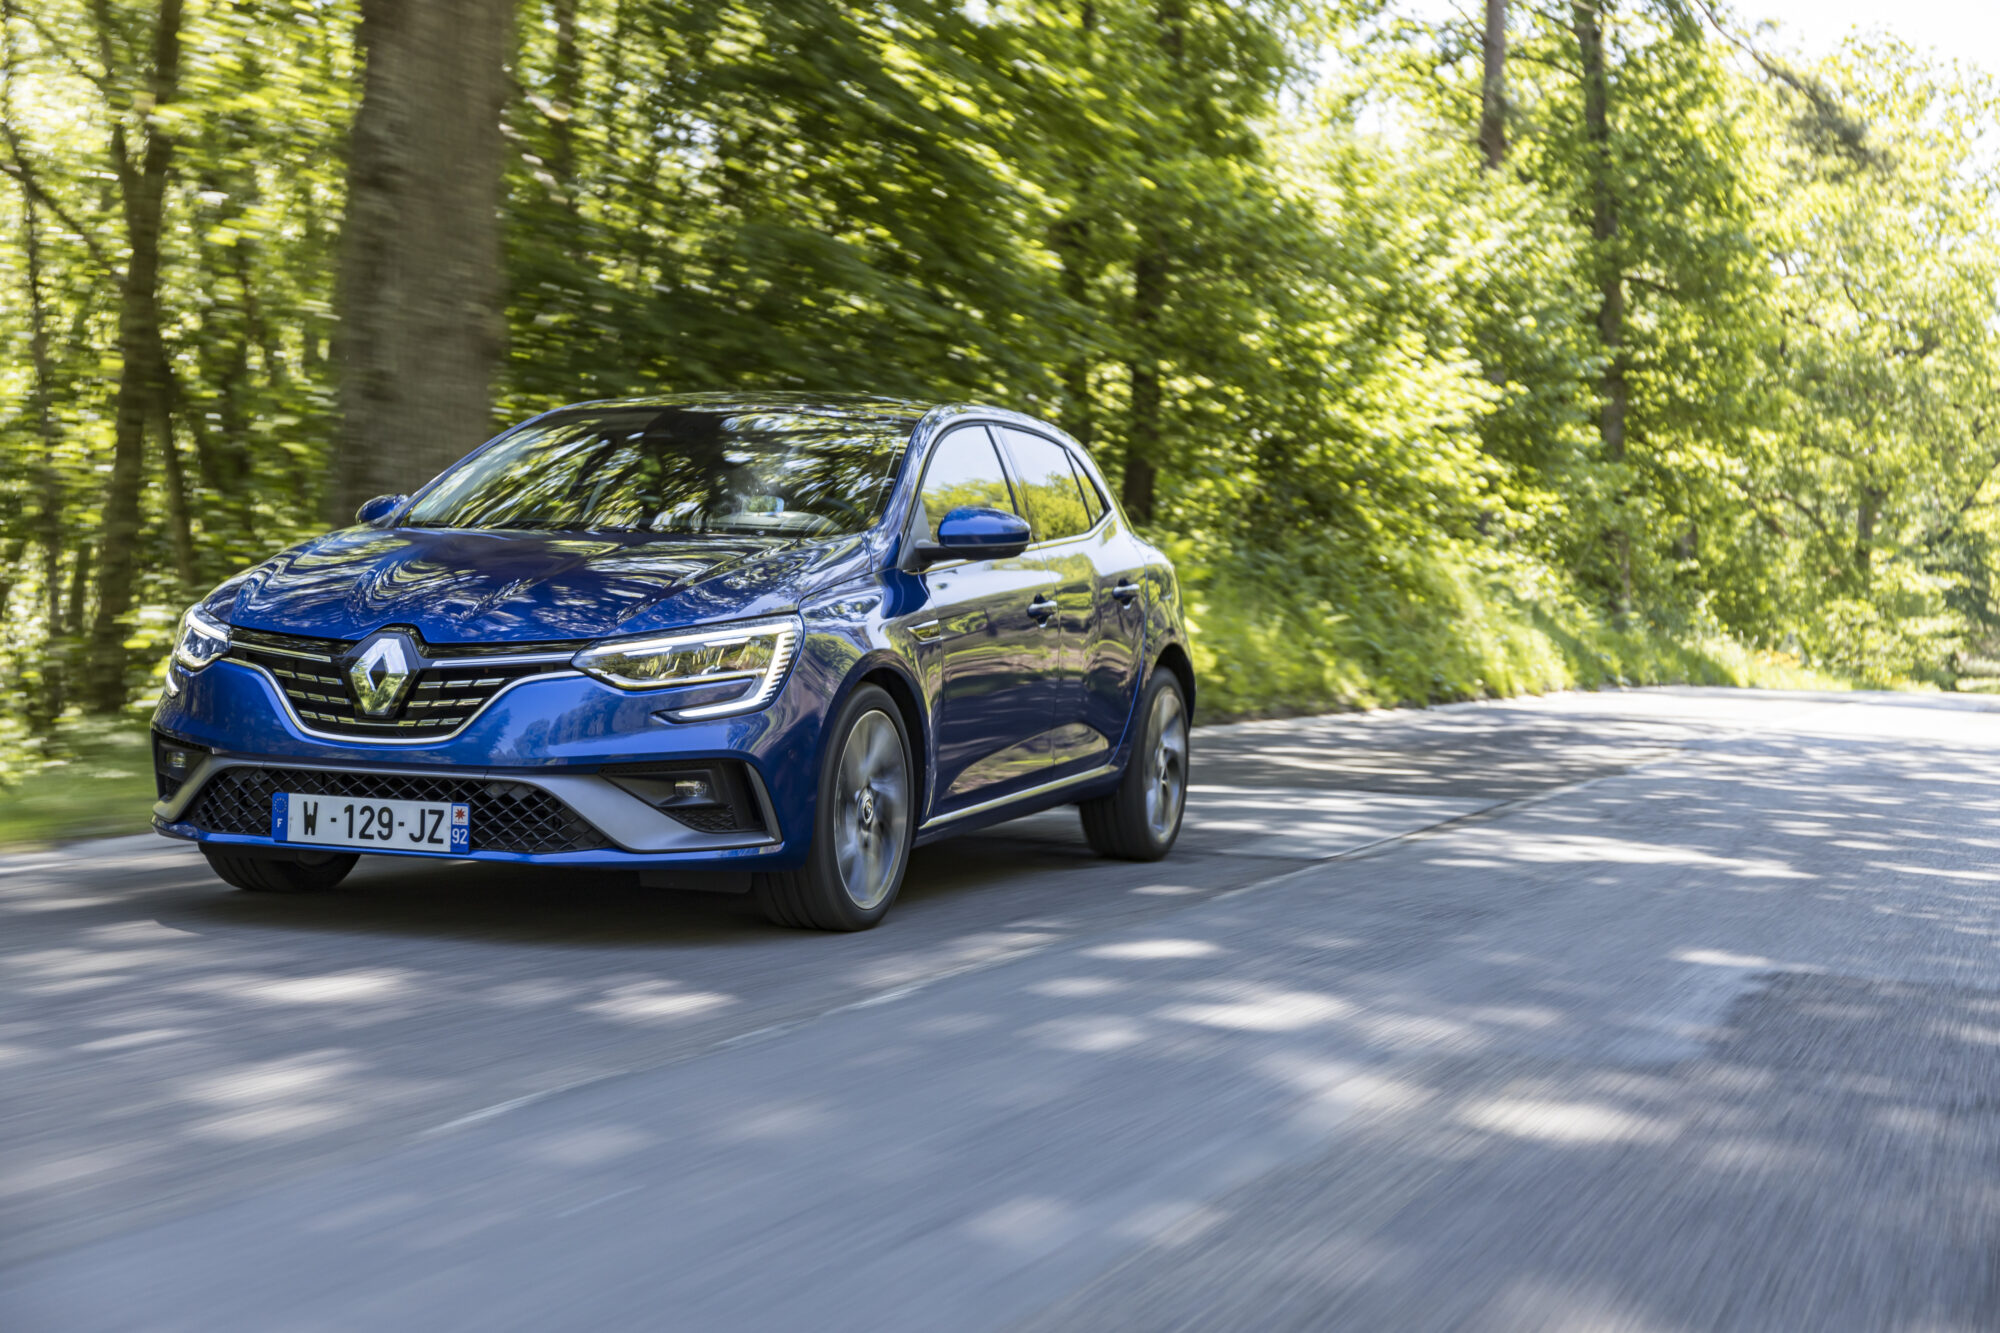 2021 - New Renault Mégane E-TECH Plug-in RS Line test-drives